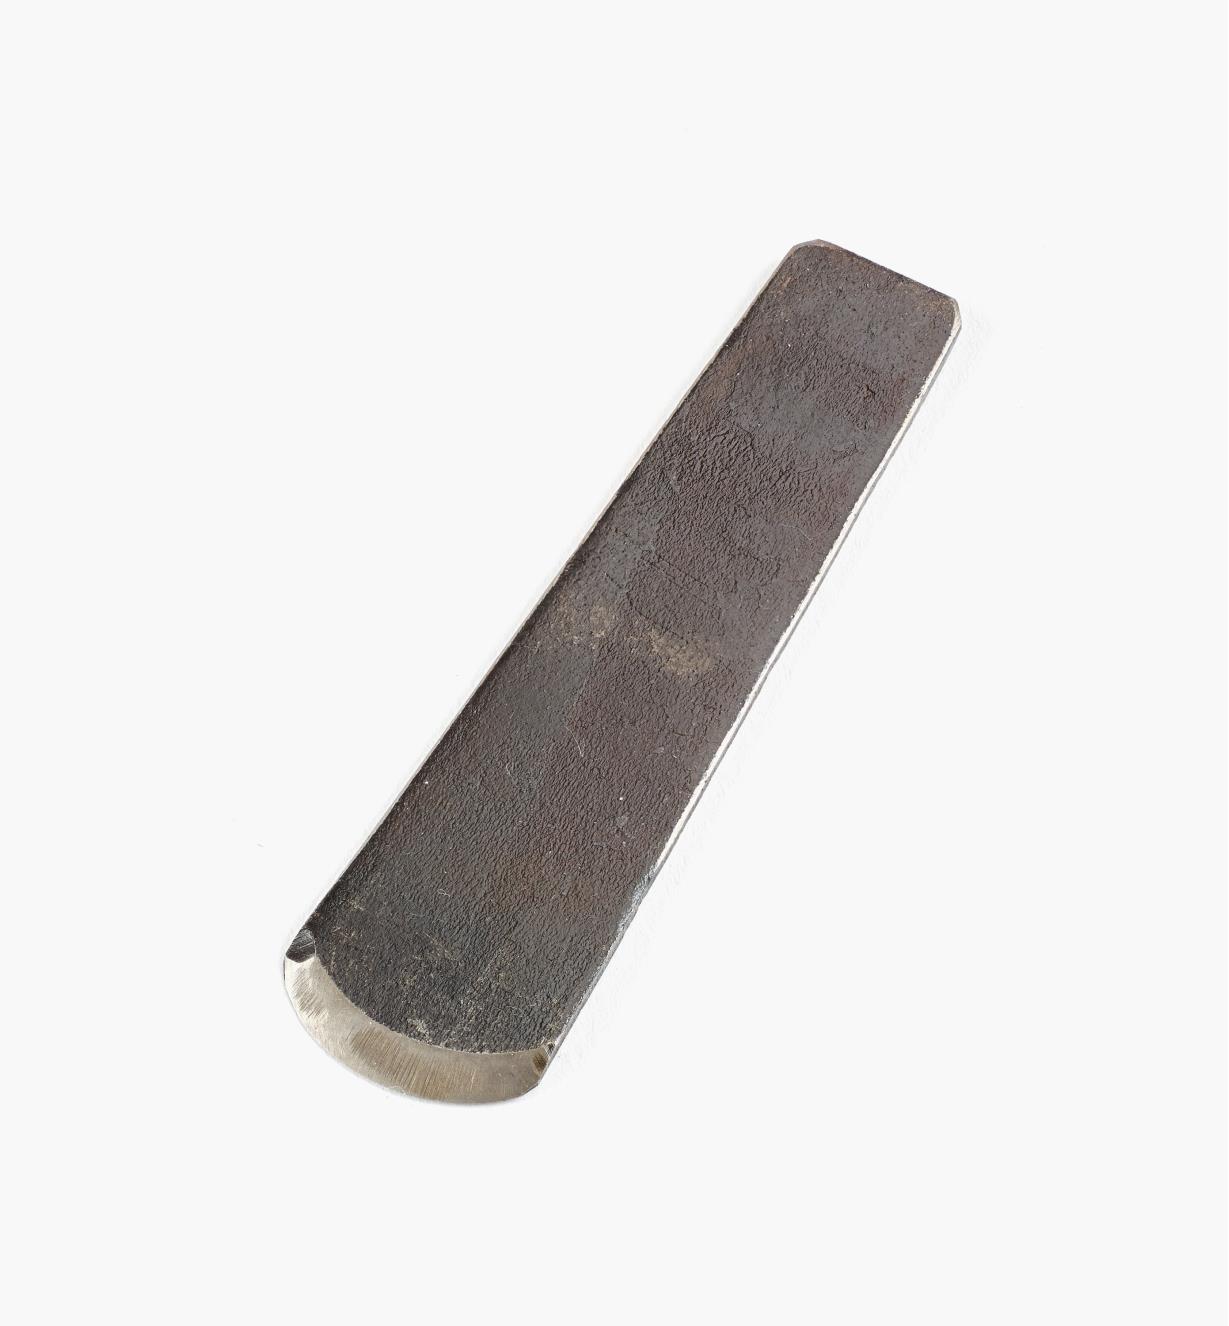 07P1622 - Replacement Blade for 25mm Round Plane